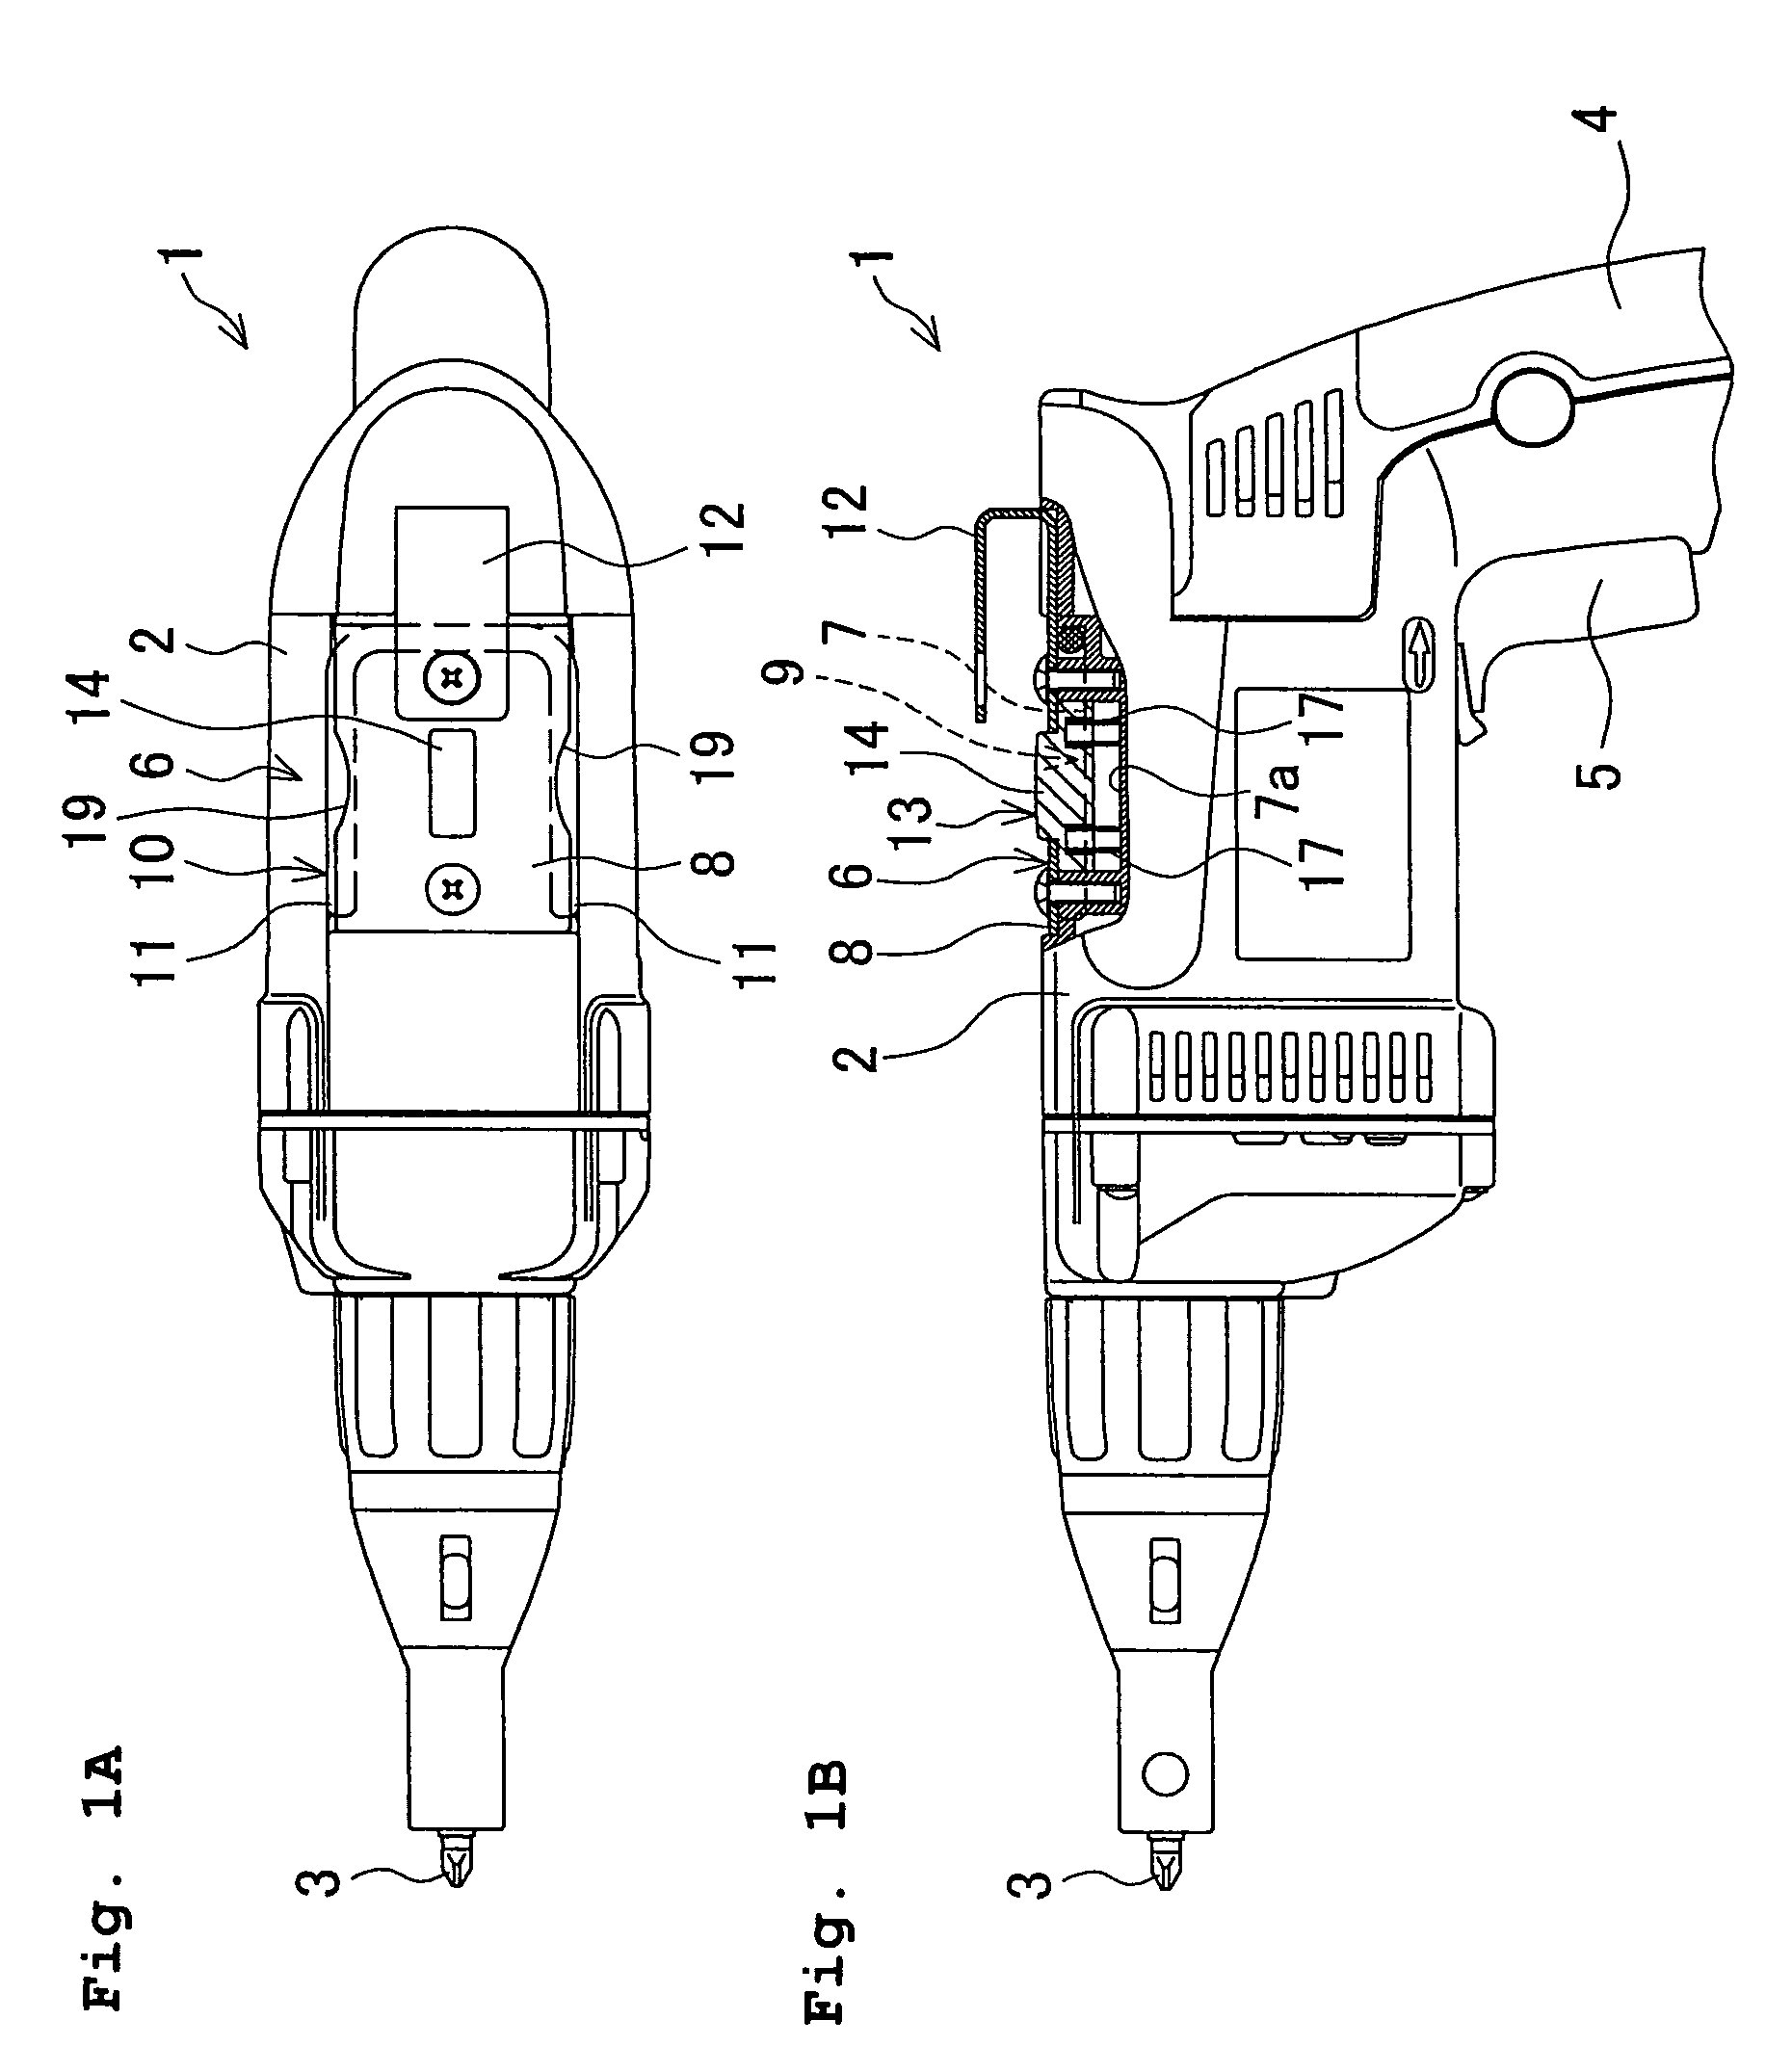 Hook structure of power tool